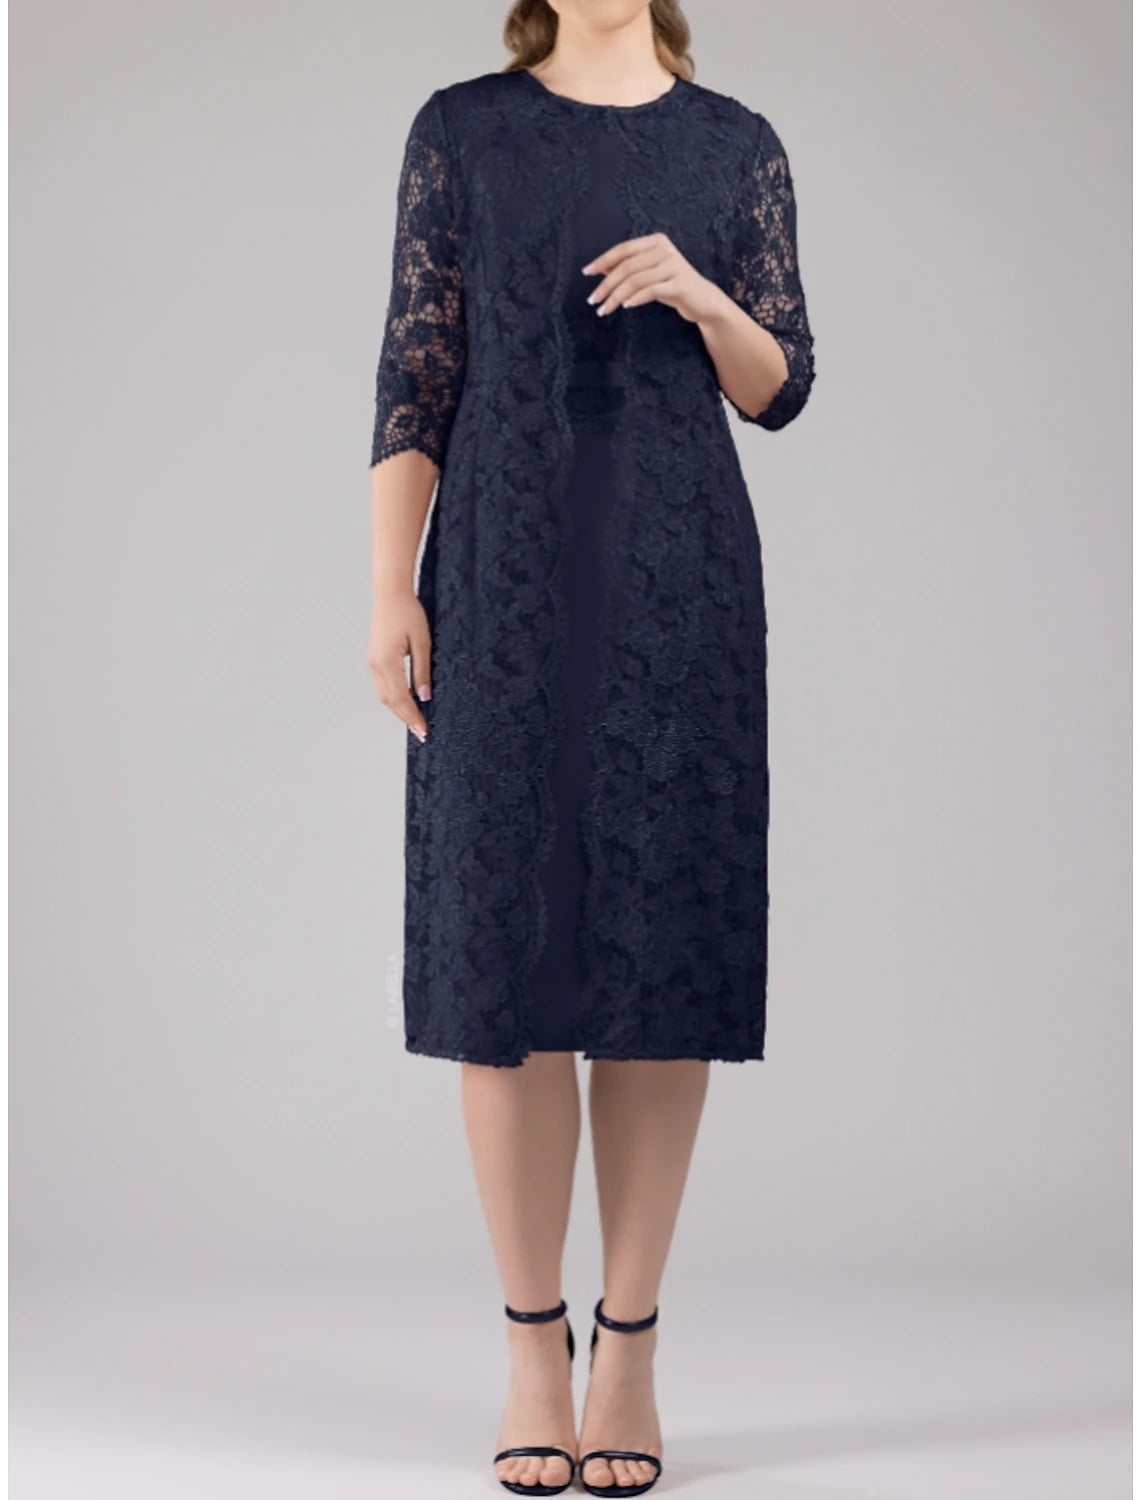 Two Piece Sheath / Column Mother of the Bride Dress Wedding Guest Elegant Petite Scoop Neck Knee Length Chiffon Lace 3/4 Length Sleeve with Bow(s) Split Front